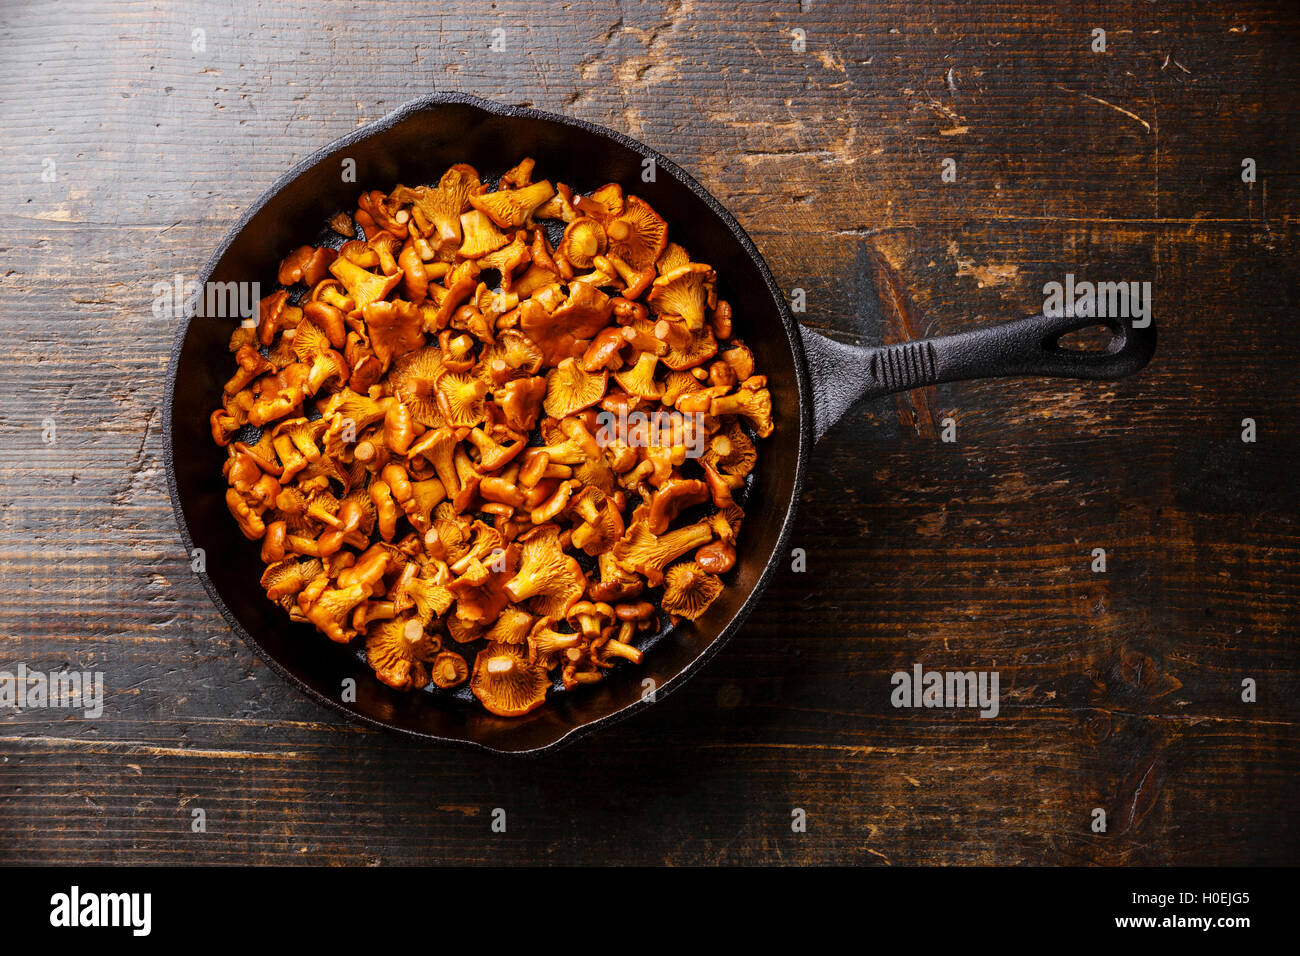 Roasted wild forest mushrooms chanterelle in pan on wooden background Stock Photo